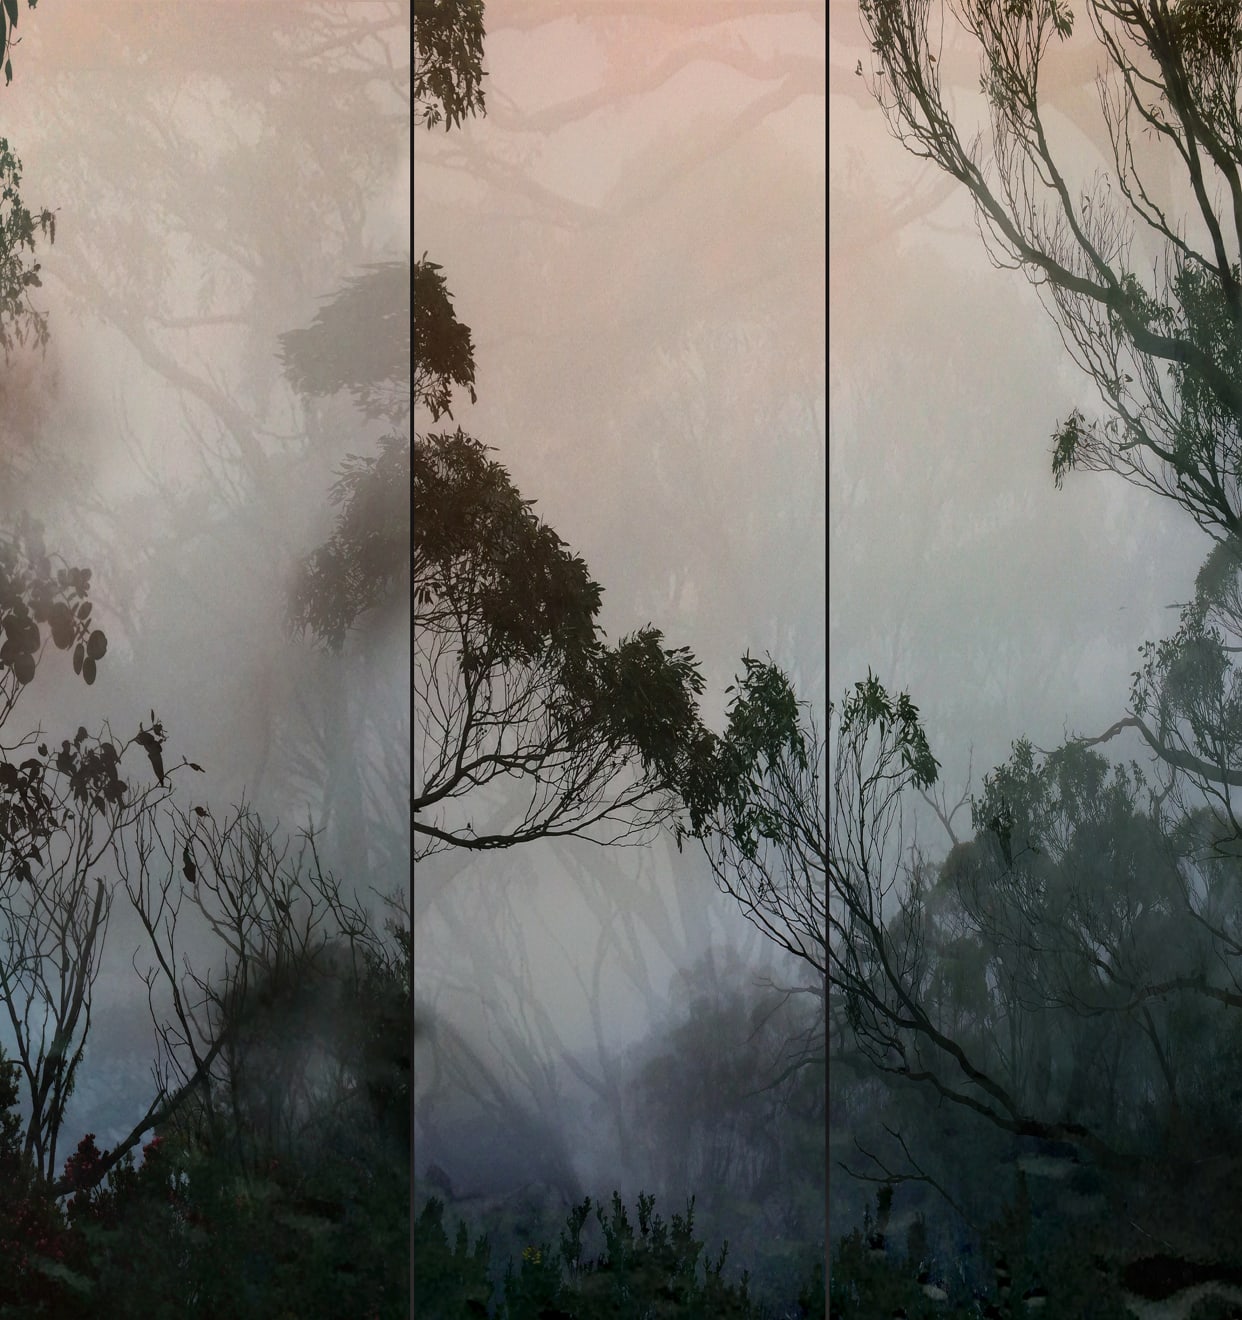 Touching Trees II Archival Pigment Print Limited Edition 10 90 x 95 cm $1700 £850